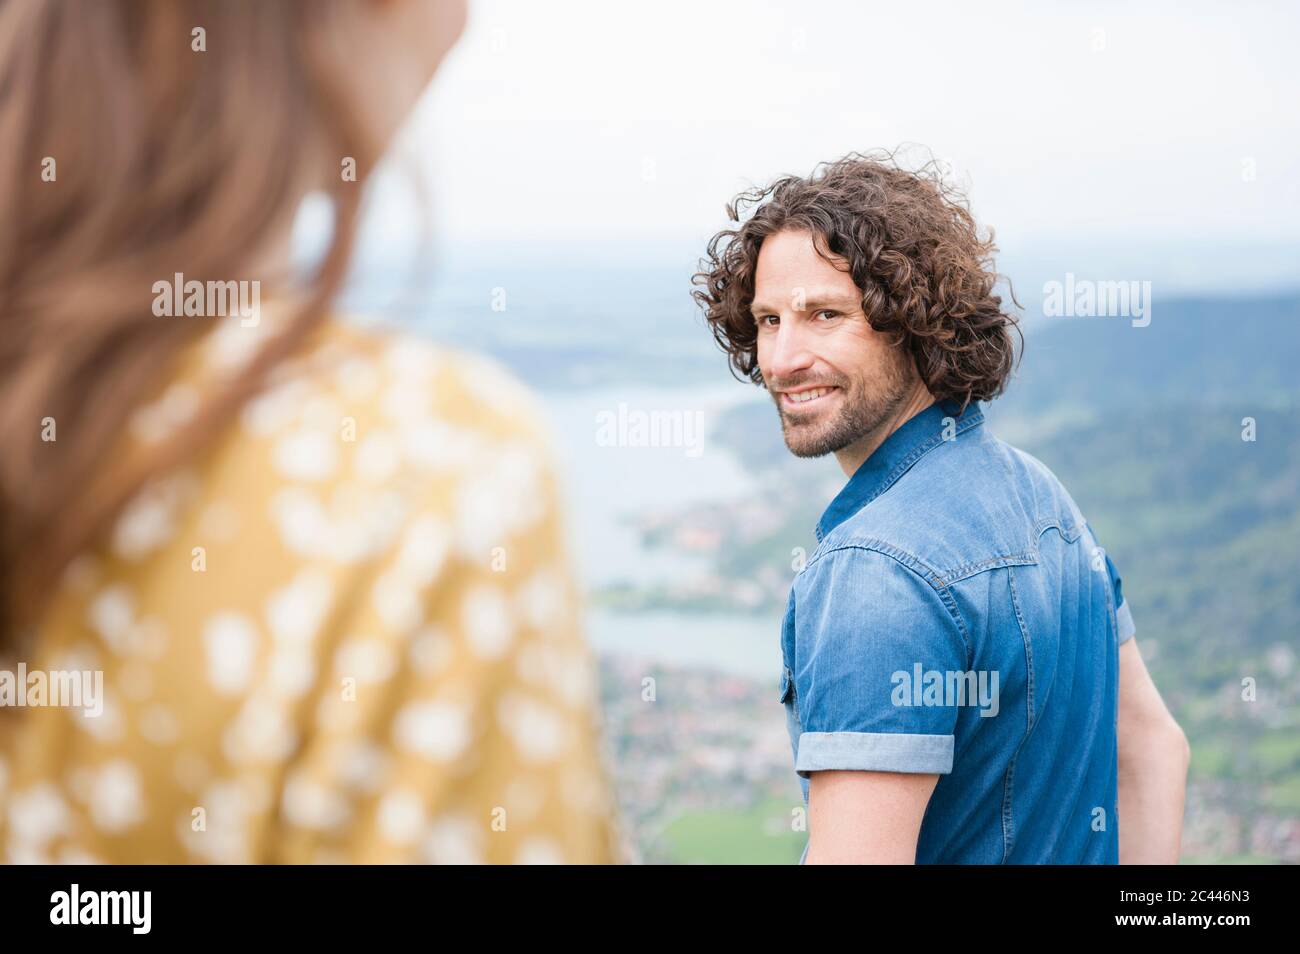 Smiling handsome man looking back at woman Stock Photo